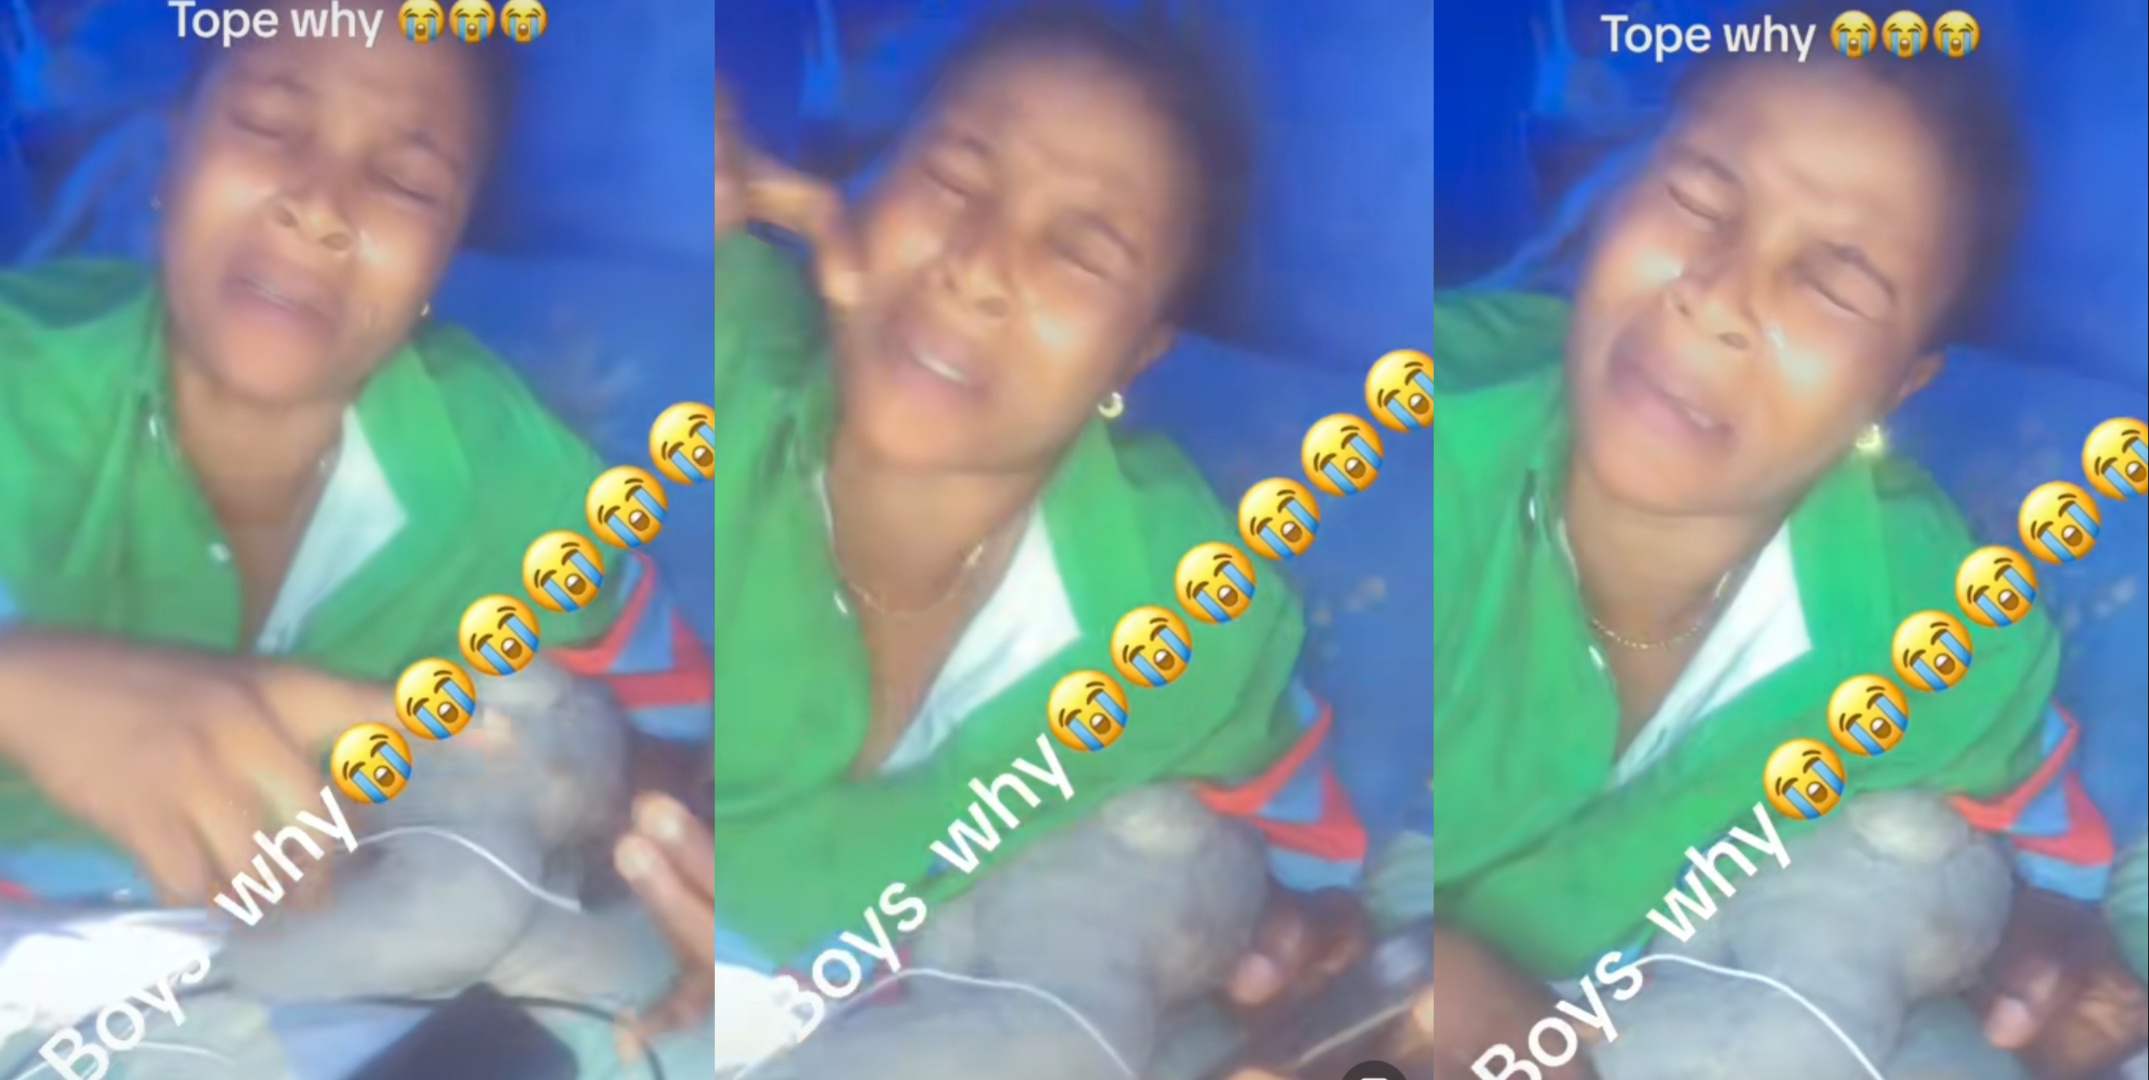 Lady places curse on boyfriend for dumping her after impregnating her (Video)